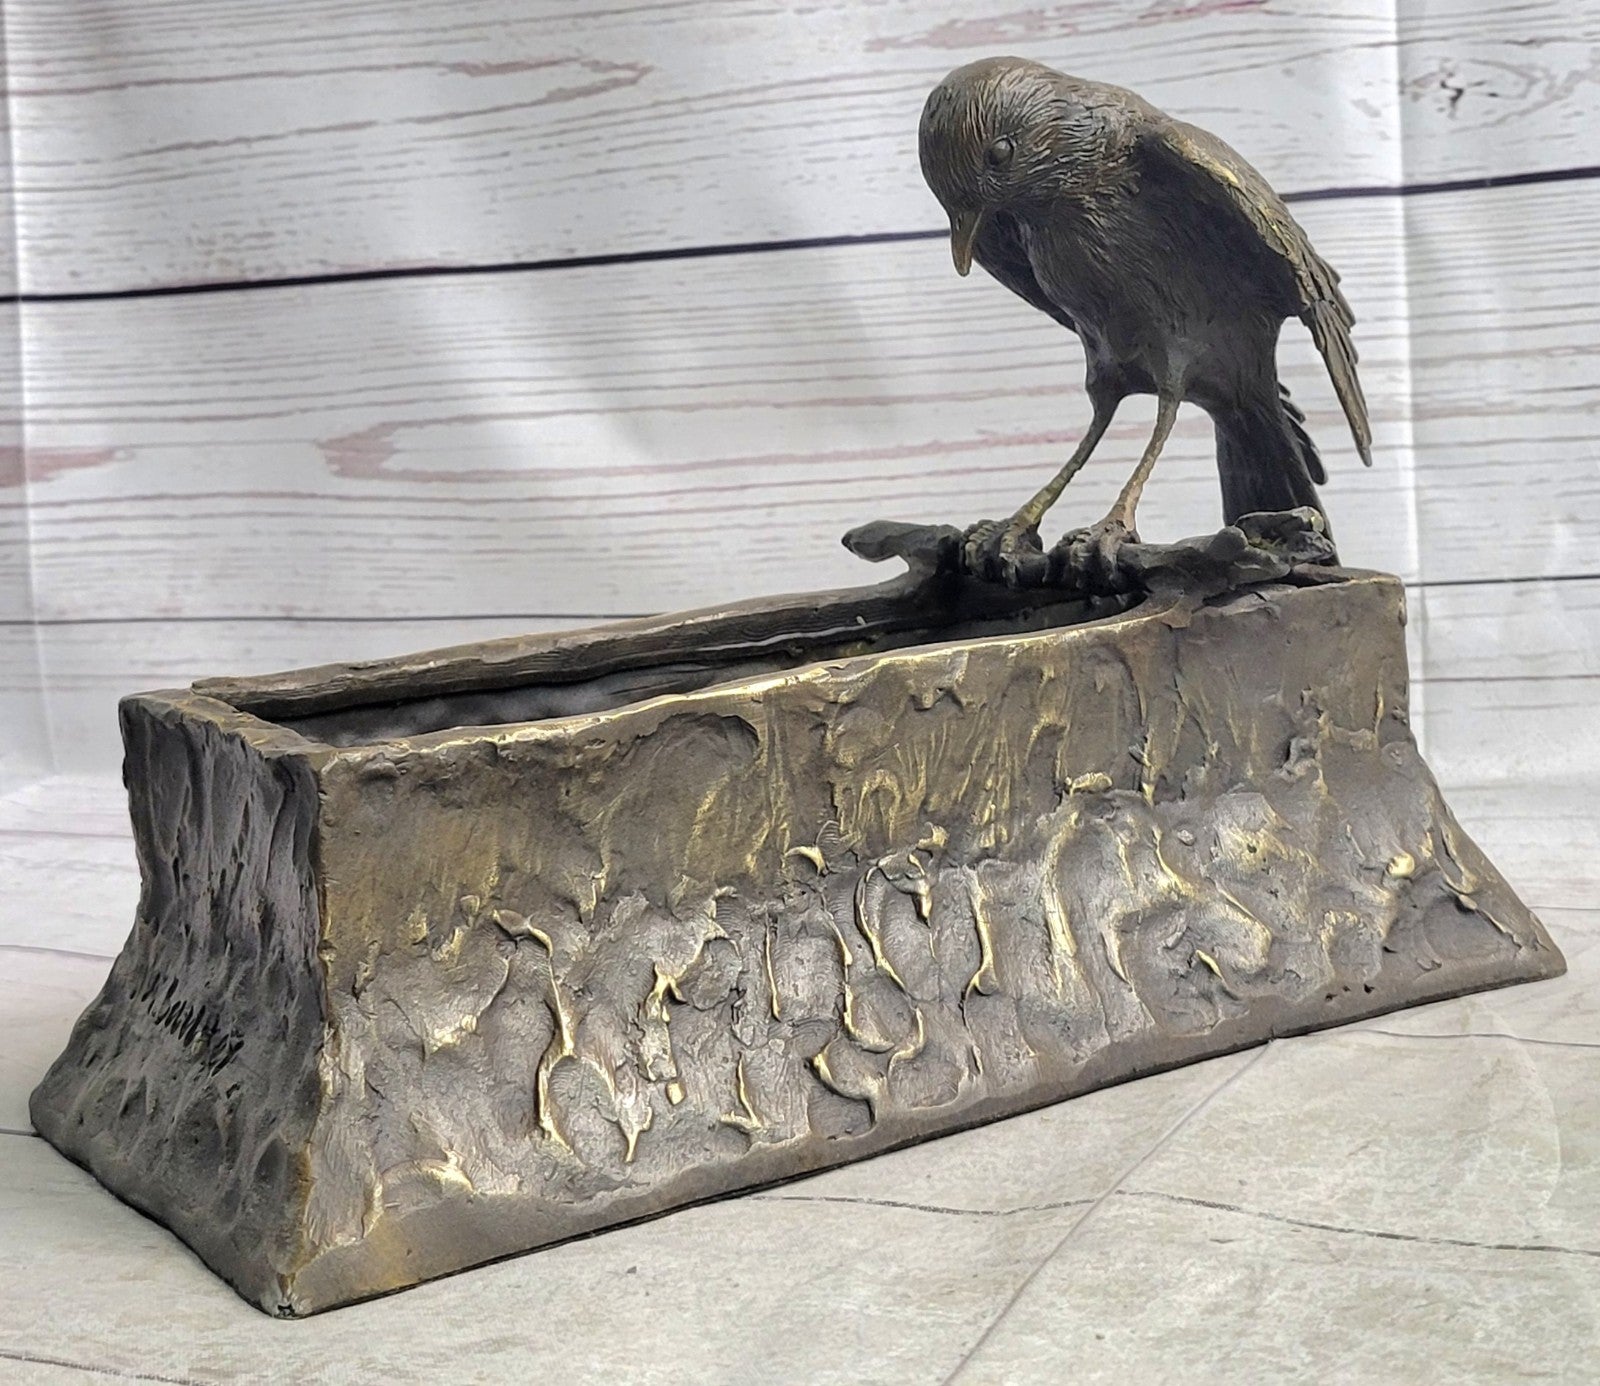 Genuine Real Bronze Bird Bath Planter: Enhance Your Home and Outdoor Spaces